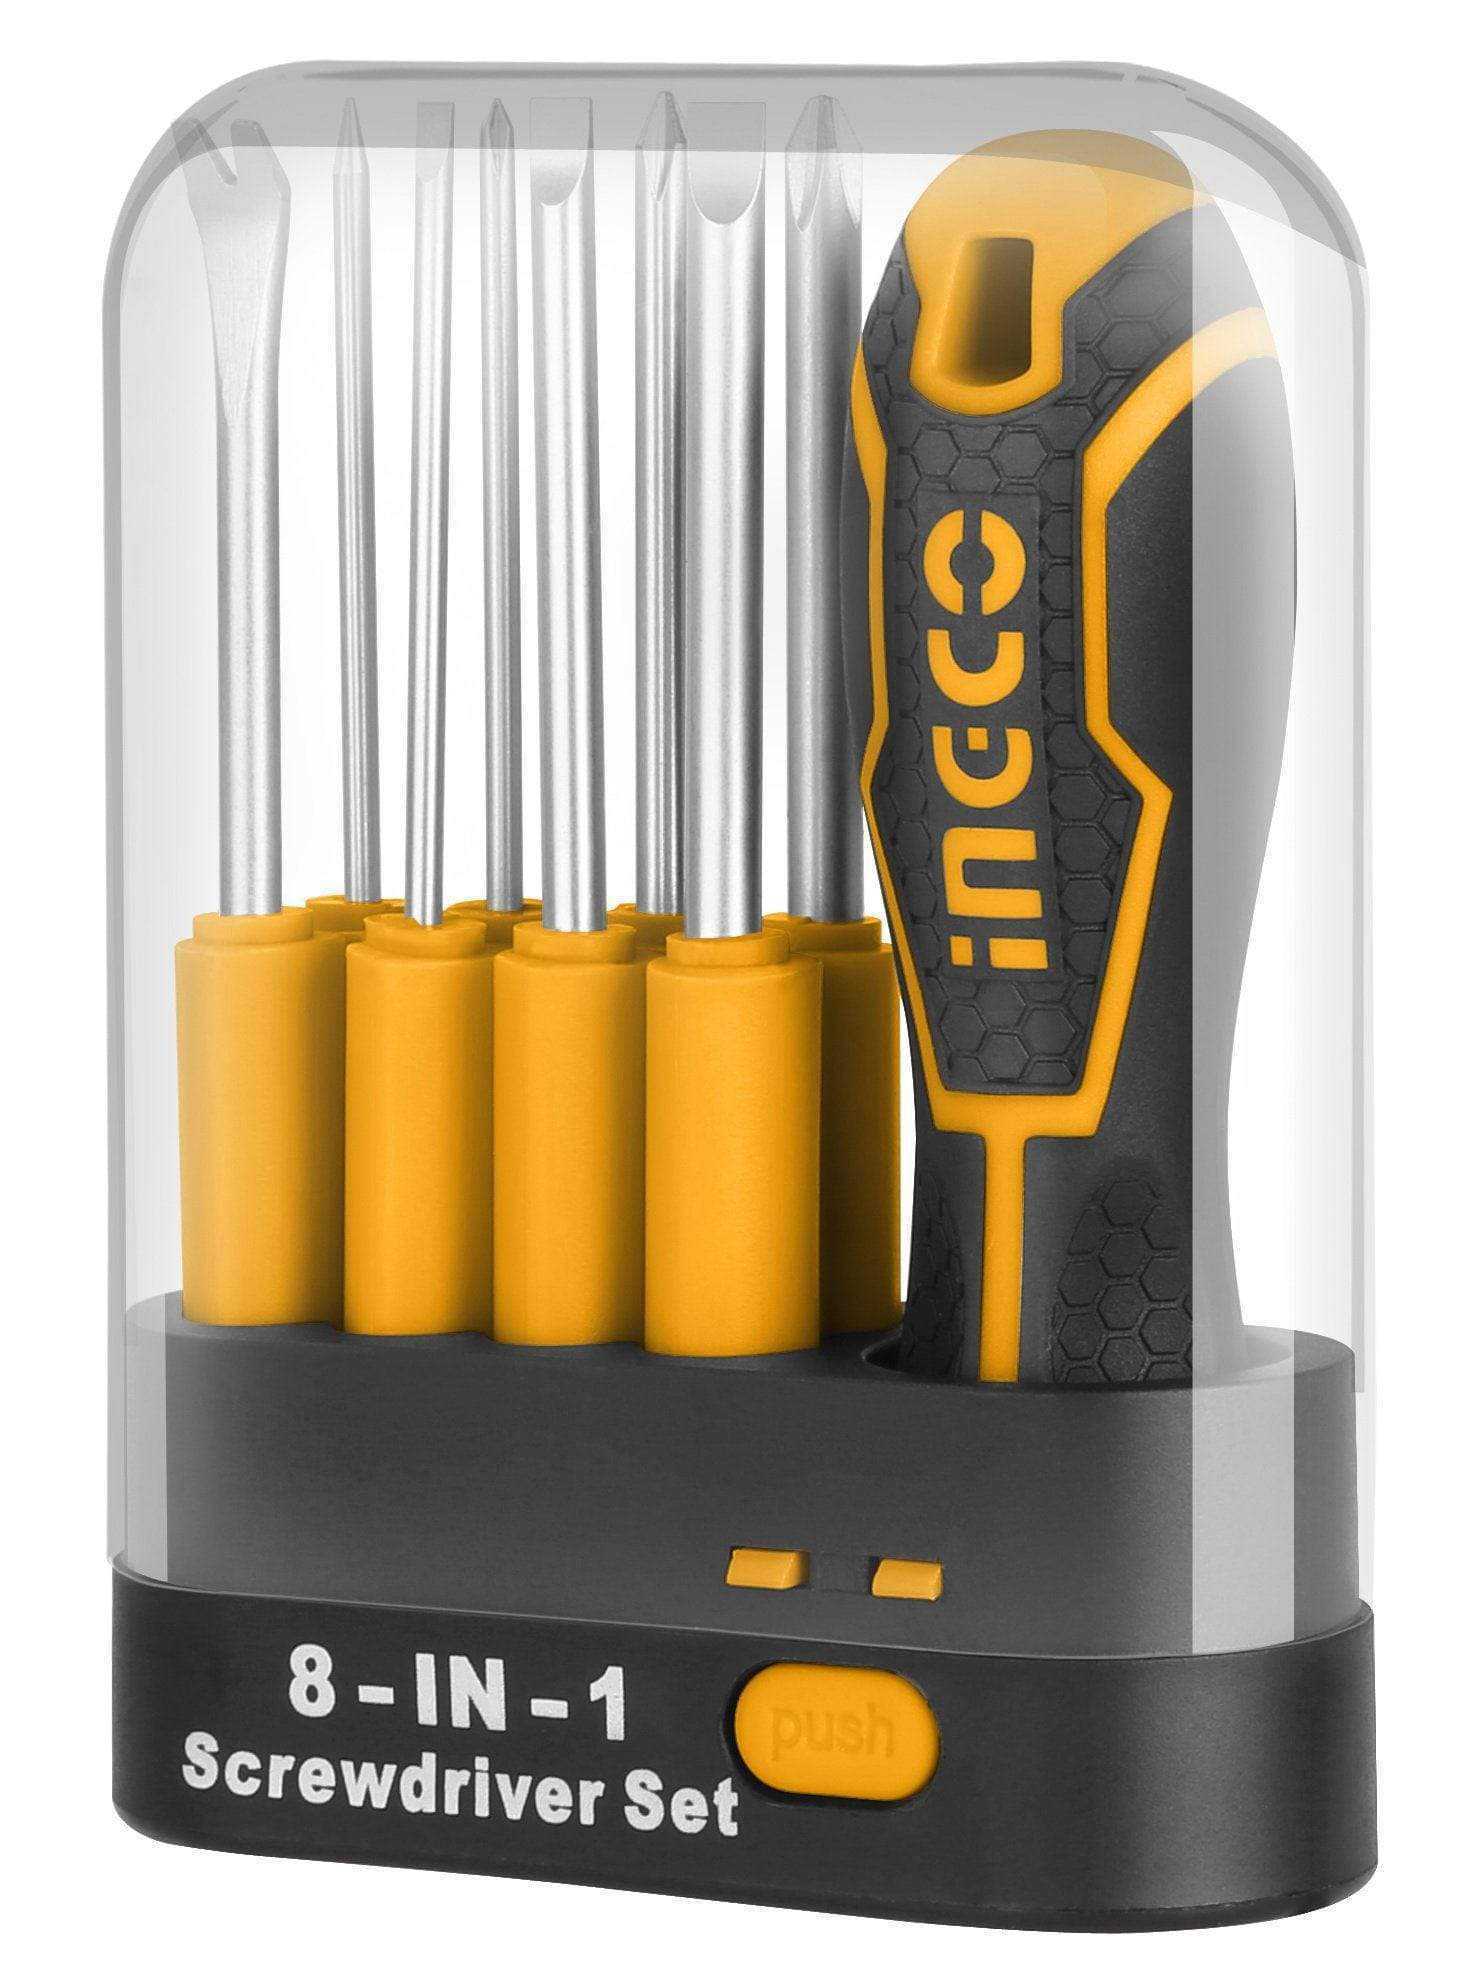 Ingco 8 in 1 Screw driver set